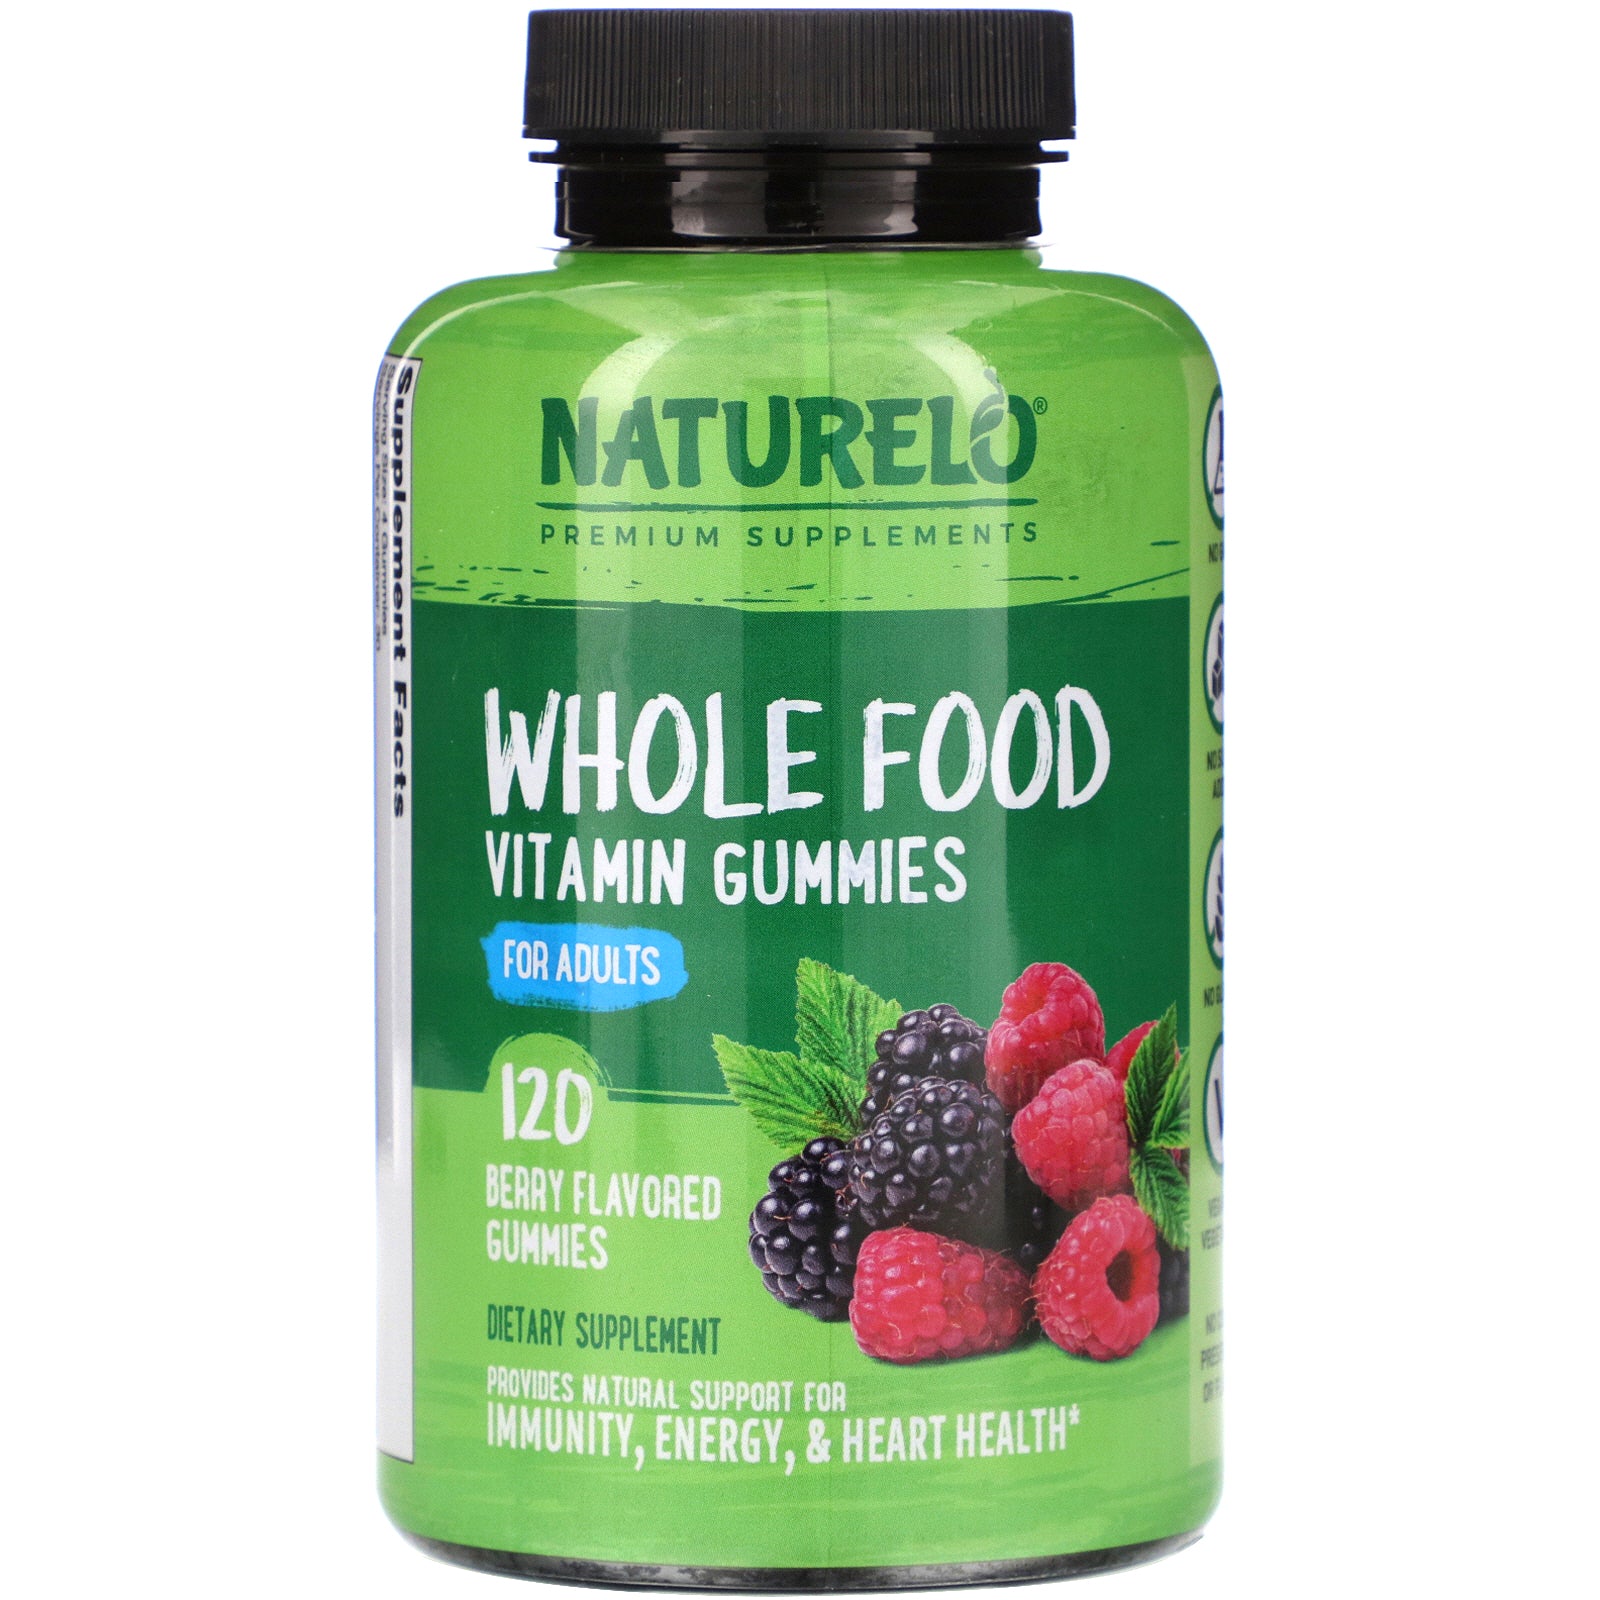 NATURELO, Whole Food Vitamin Gummies for Adults, Berry Flavored, 120 Gummies